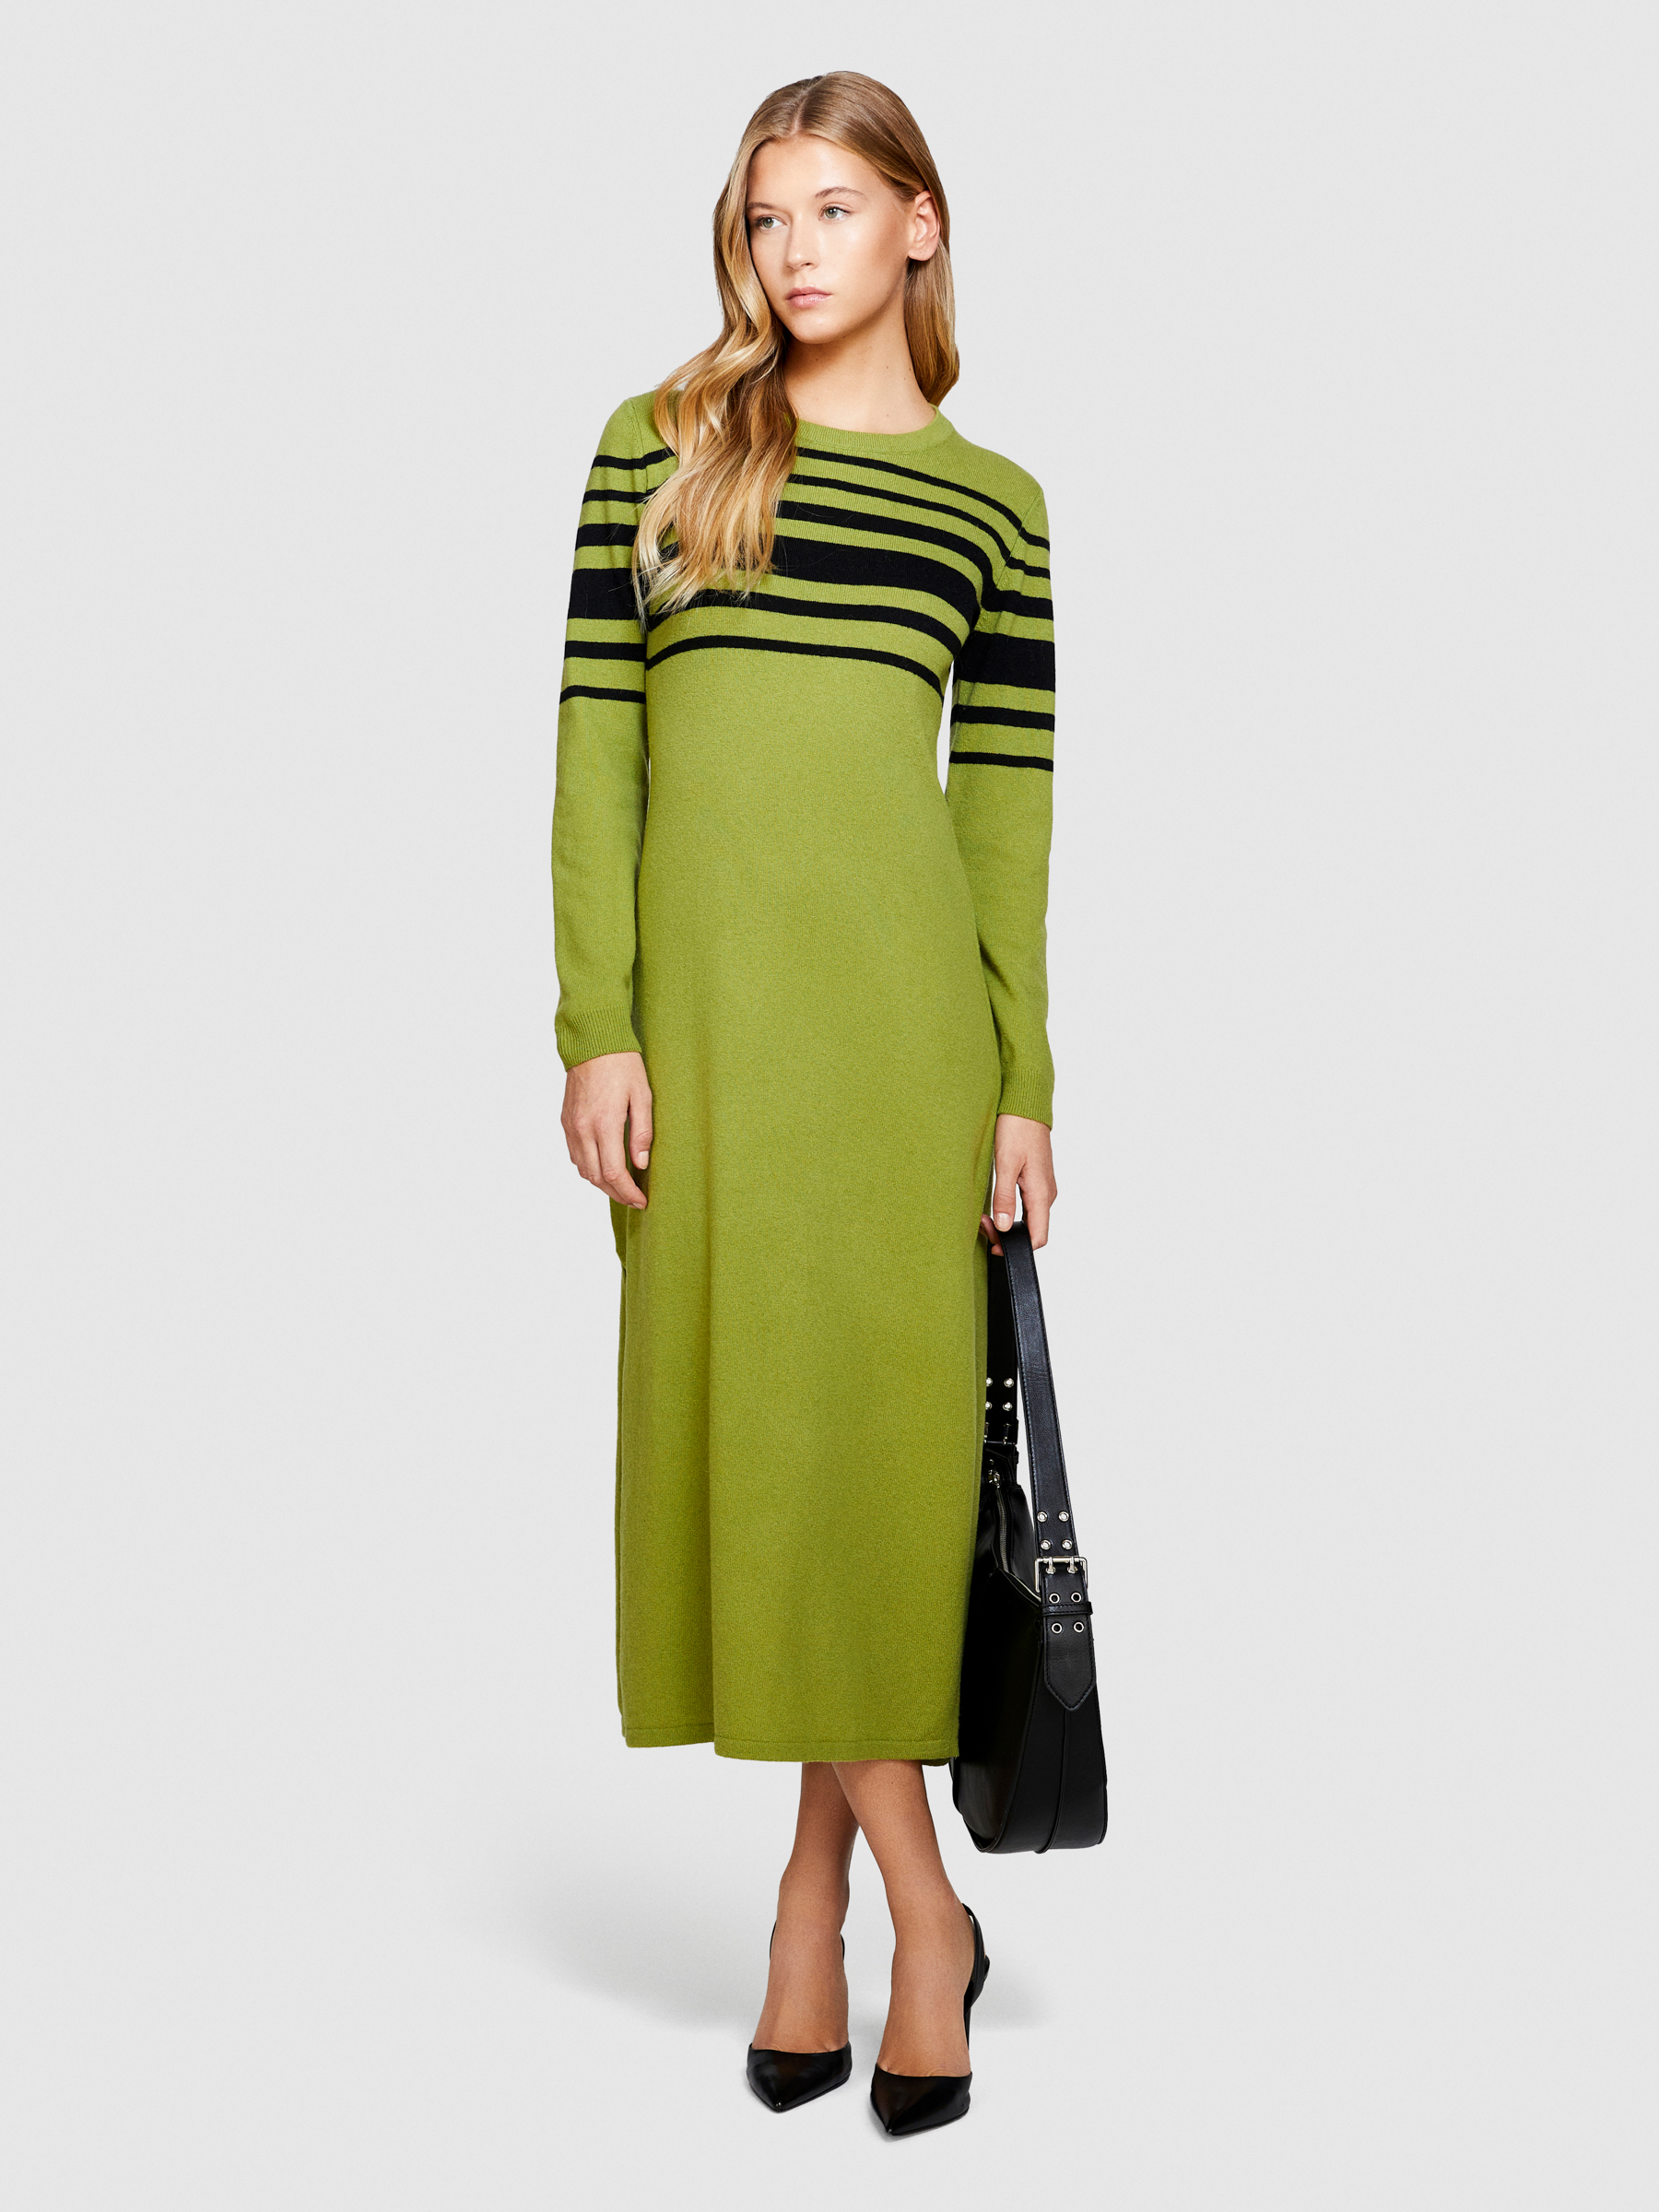 Sisley - Knit Dress With Stripes, Woman, Olive Green, Size: S